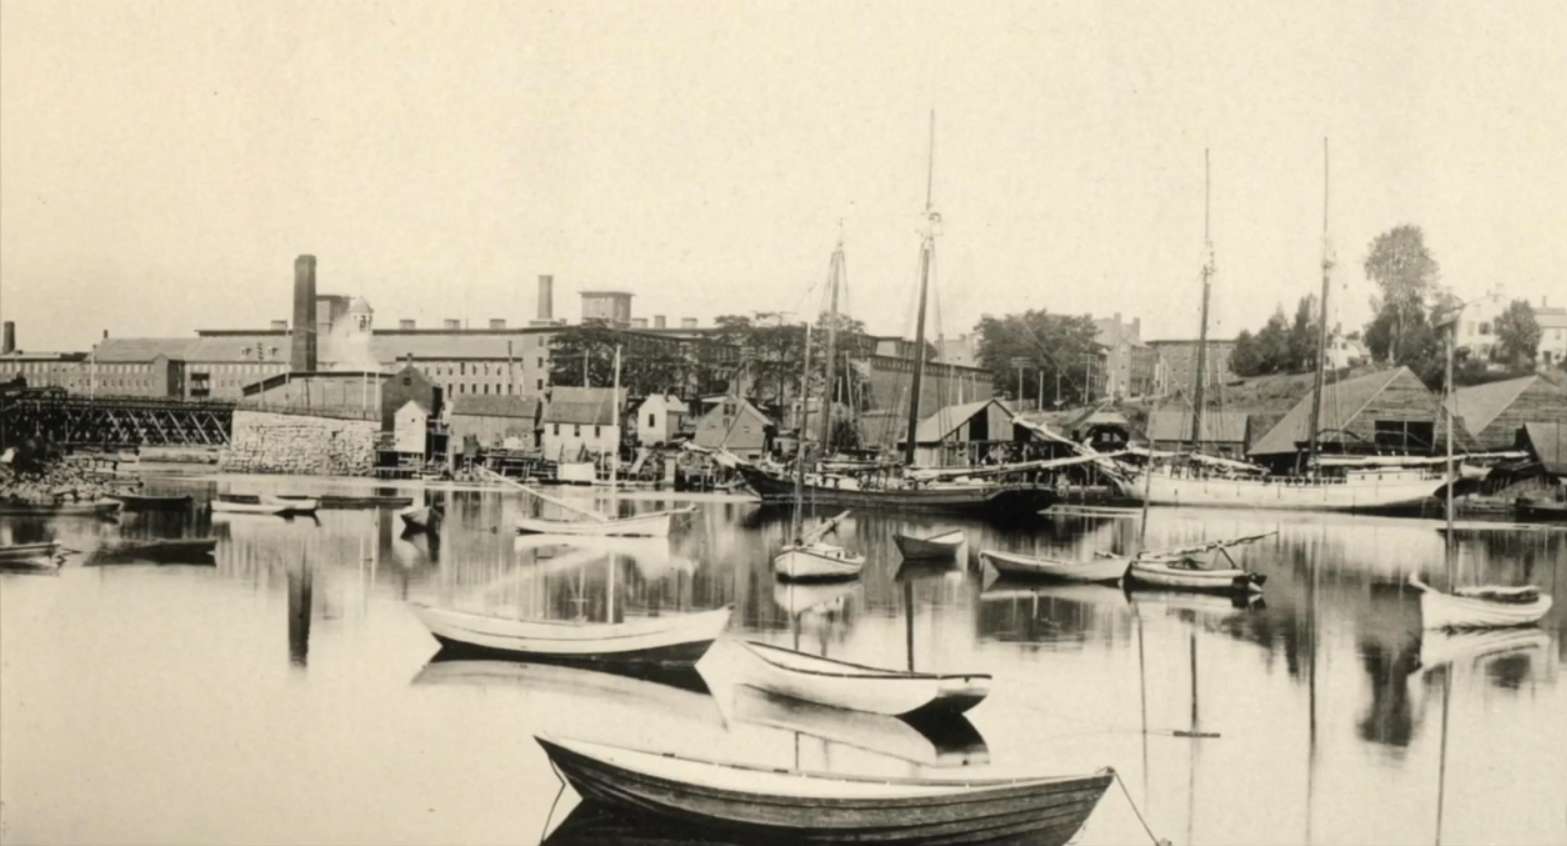 a sepia toned photo from likely the early 20th century of boats in a river with land with buildings on it behind